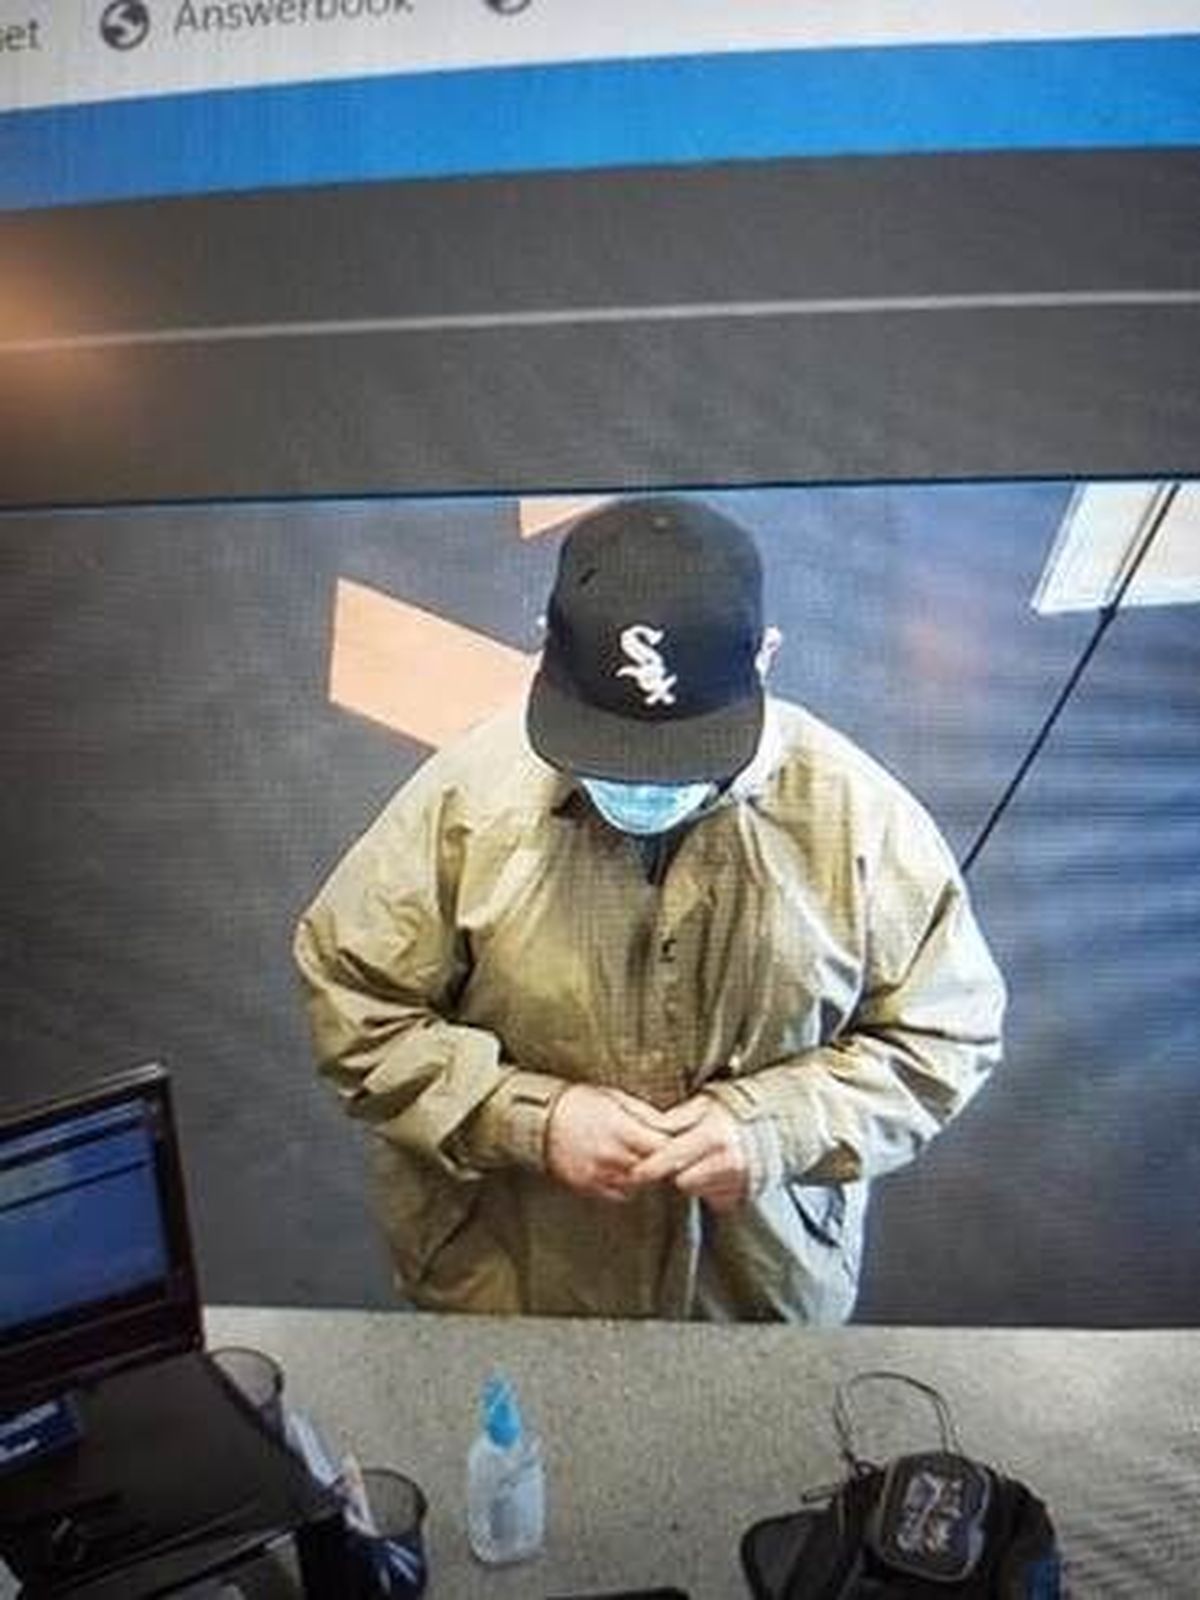 Police are looking for this man who is suspected of robbing a credit union Wednesday in East Central Spokane.  (Courtesy of Spokane Police Department)